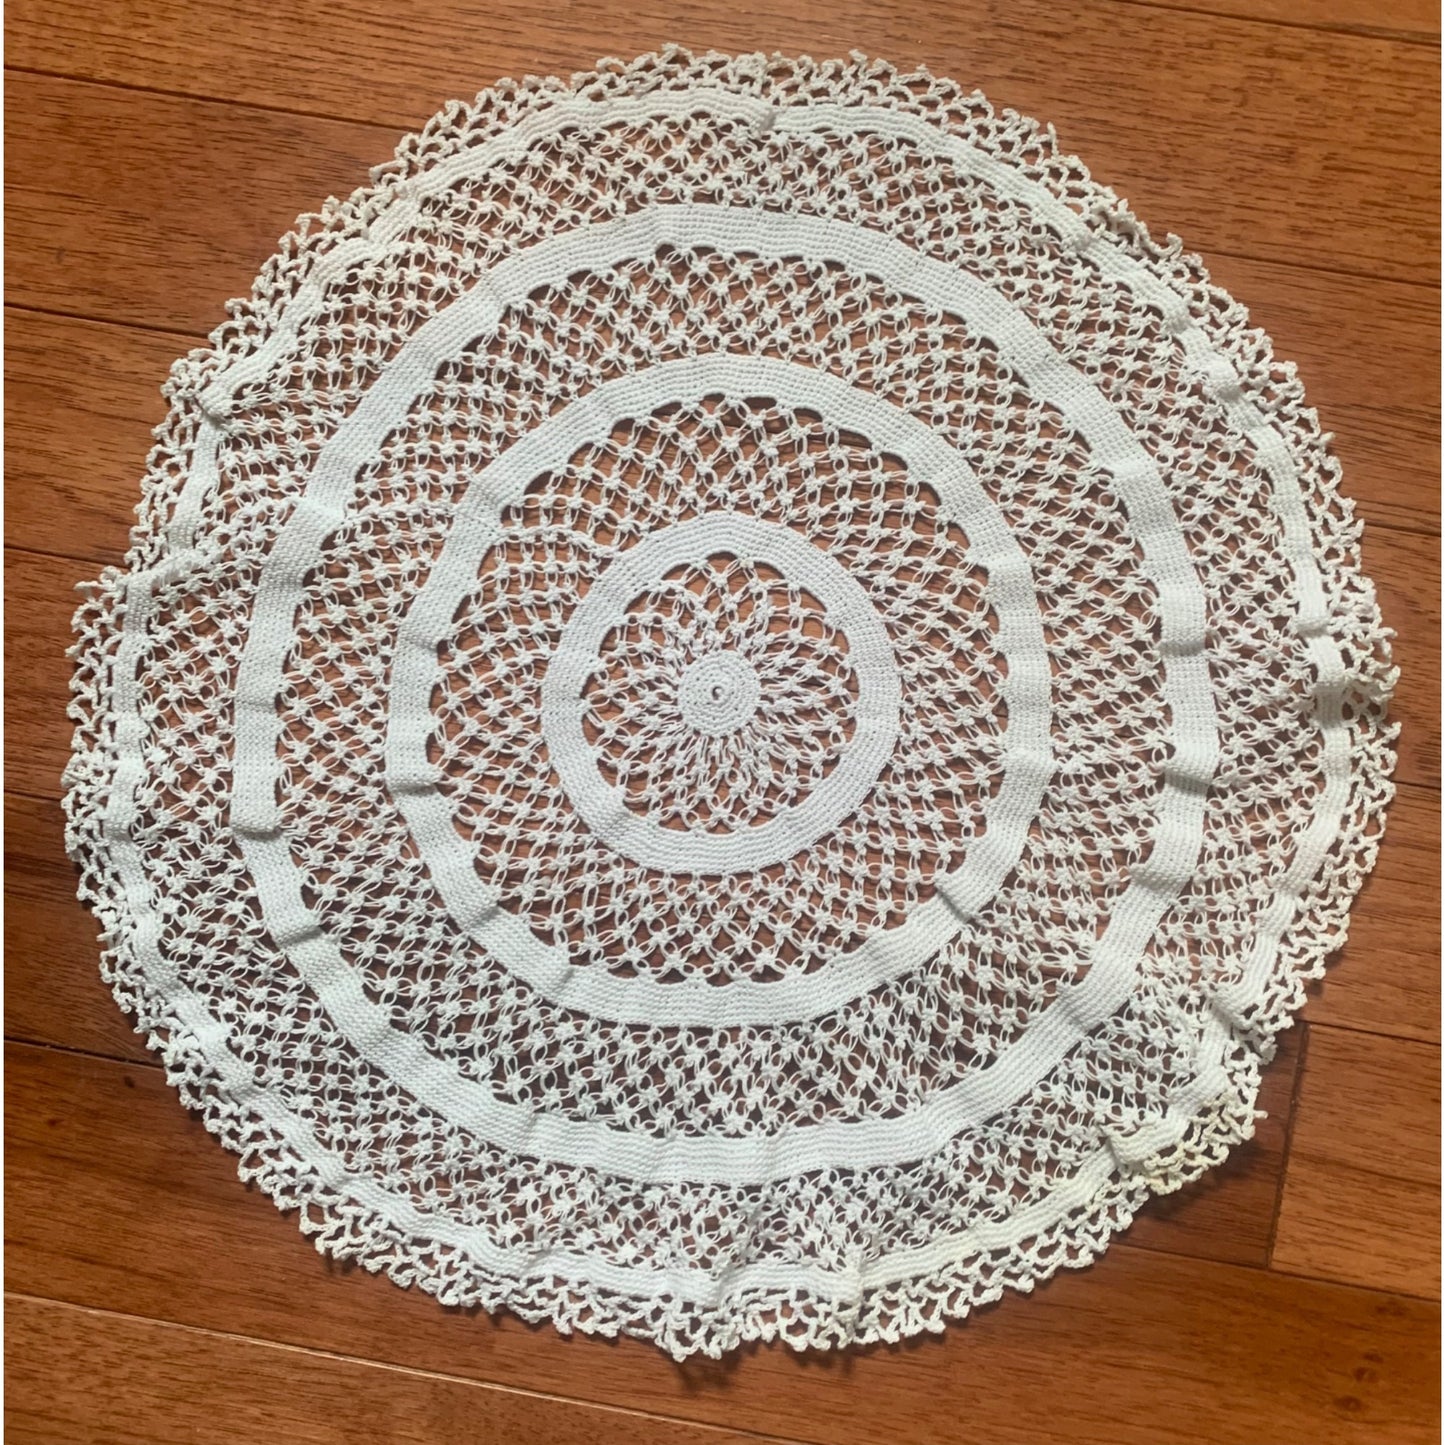 Vintage hand crocheted round doily 12 inches